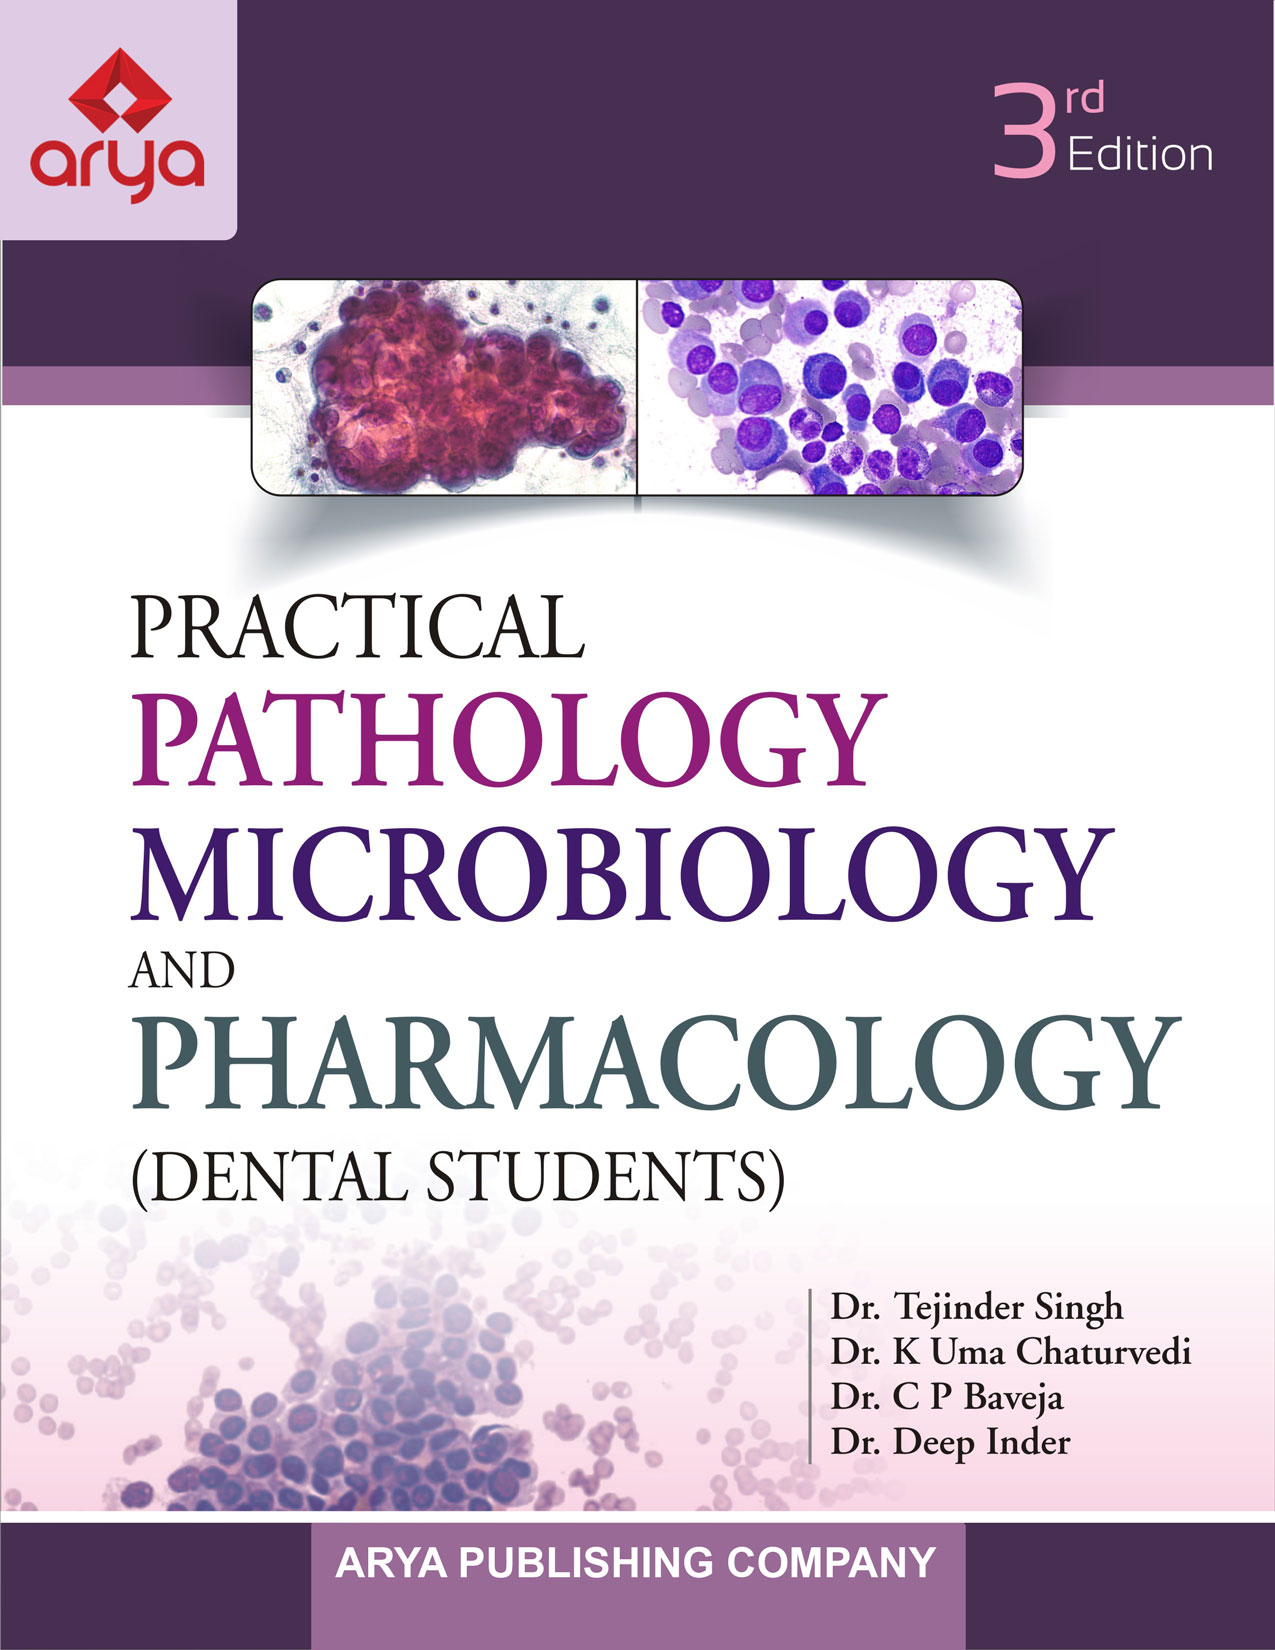 Practical Pathology, Microbiology and Pharmacology  (Dental Students) 